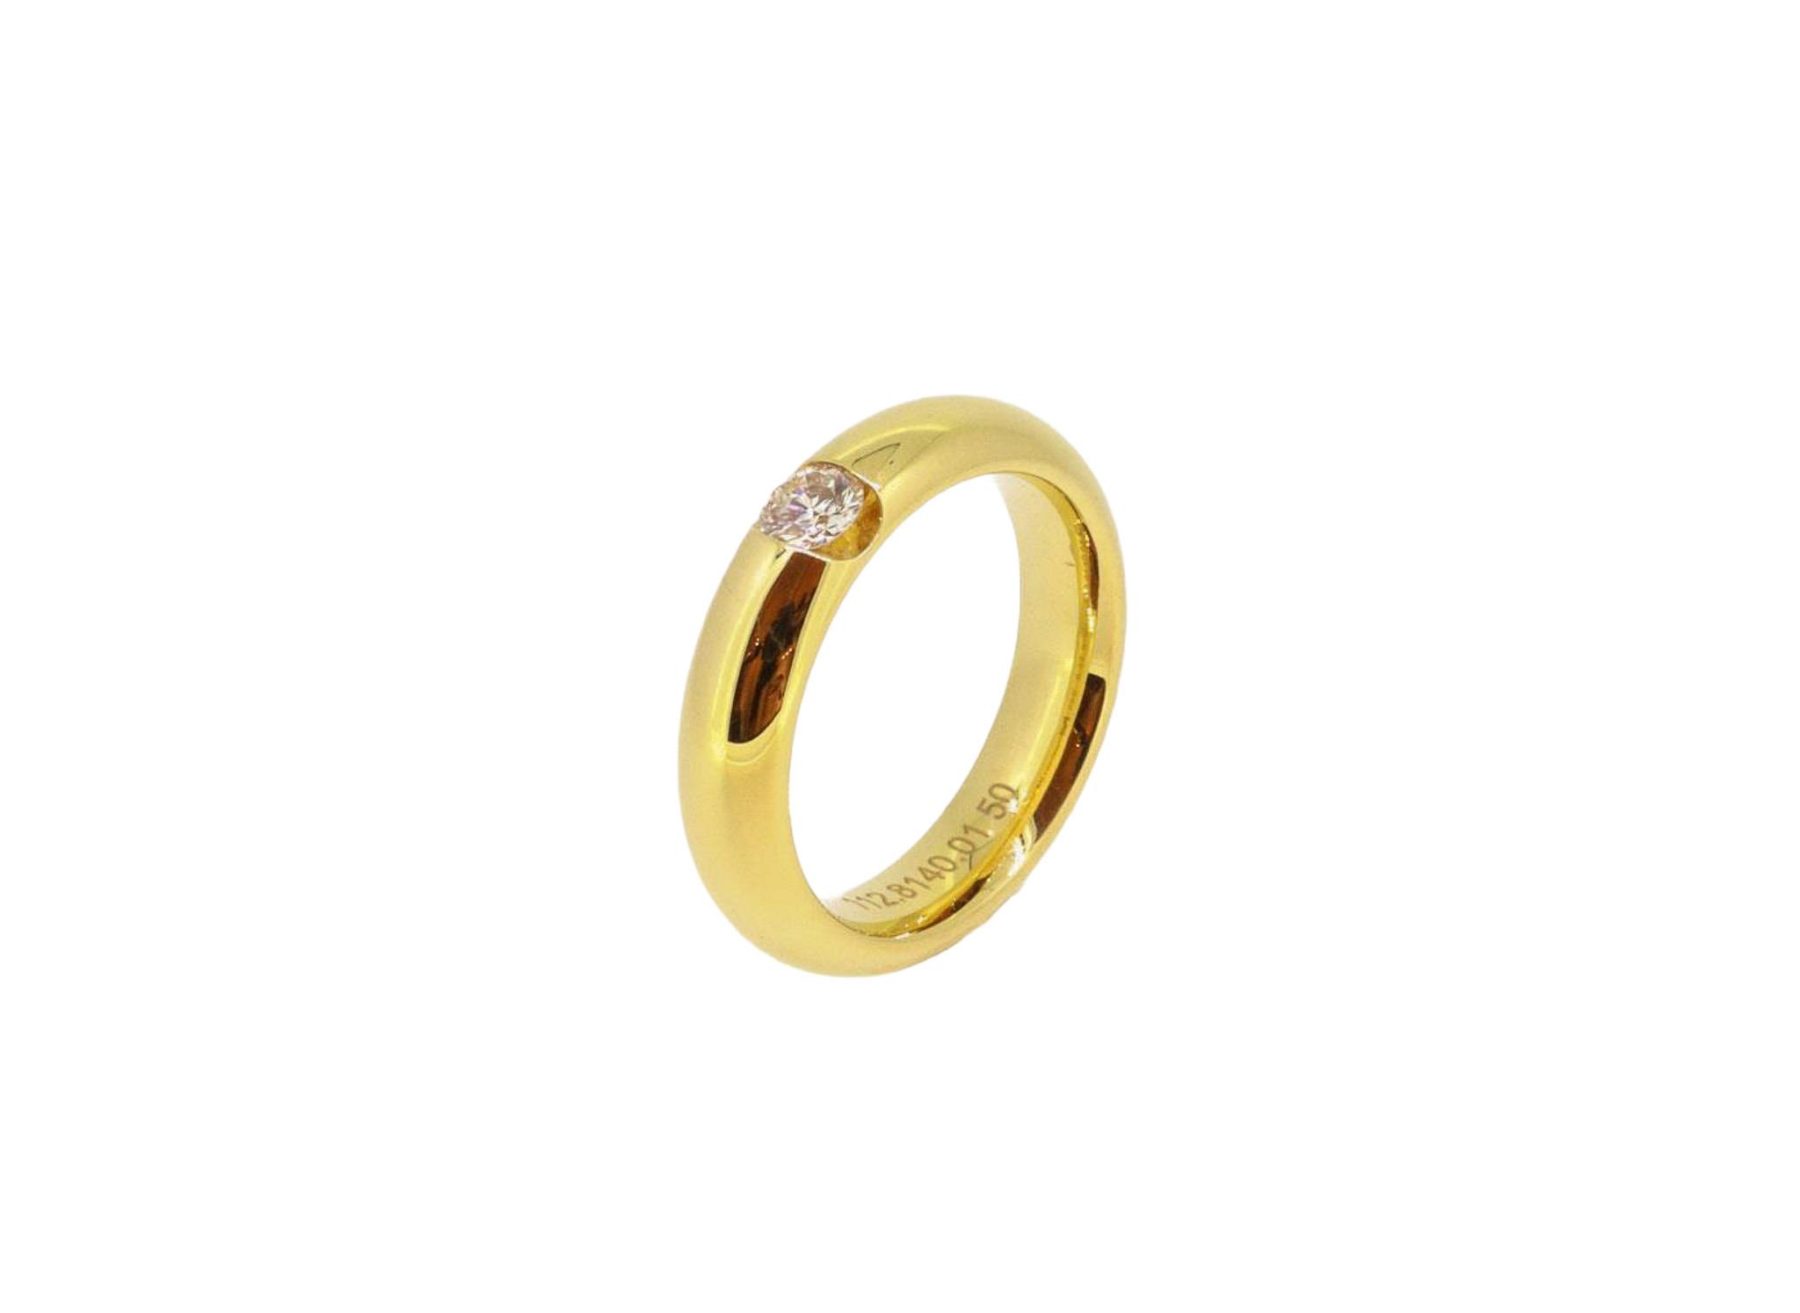 Ring 0,22ct Solitaire 18kt Gelbgold - Meister - 112.8140.01